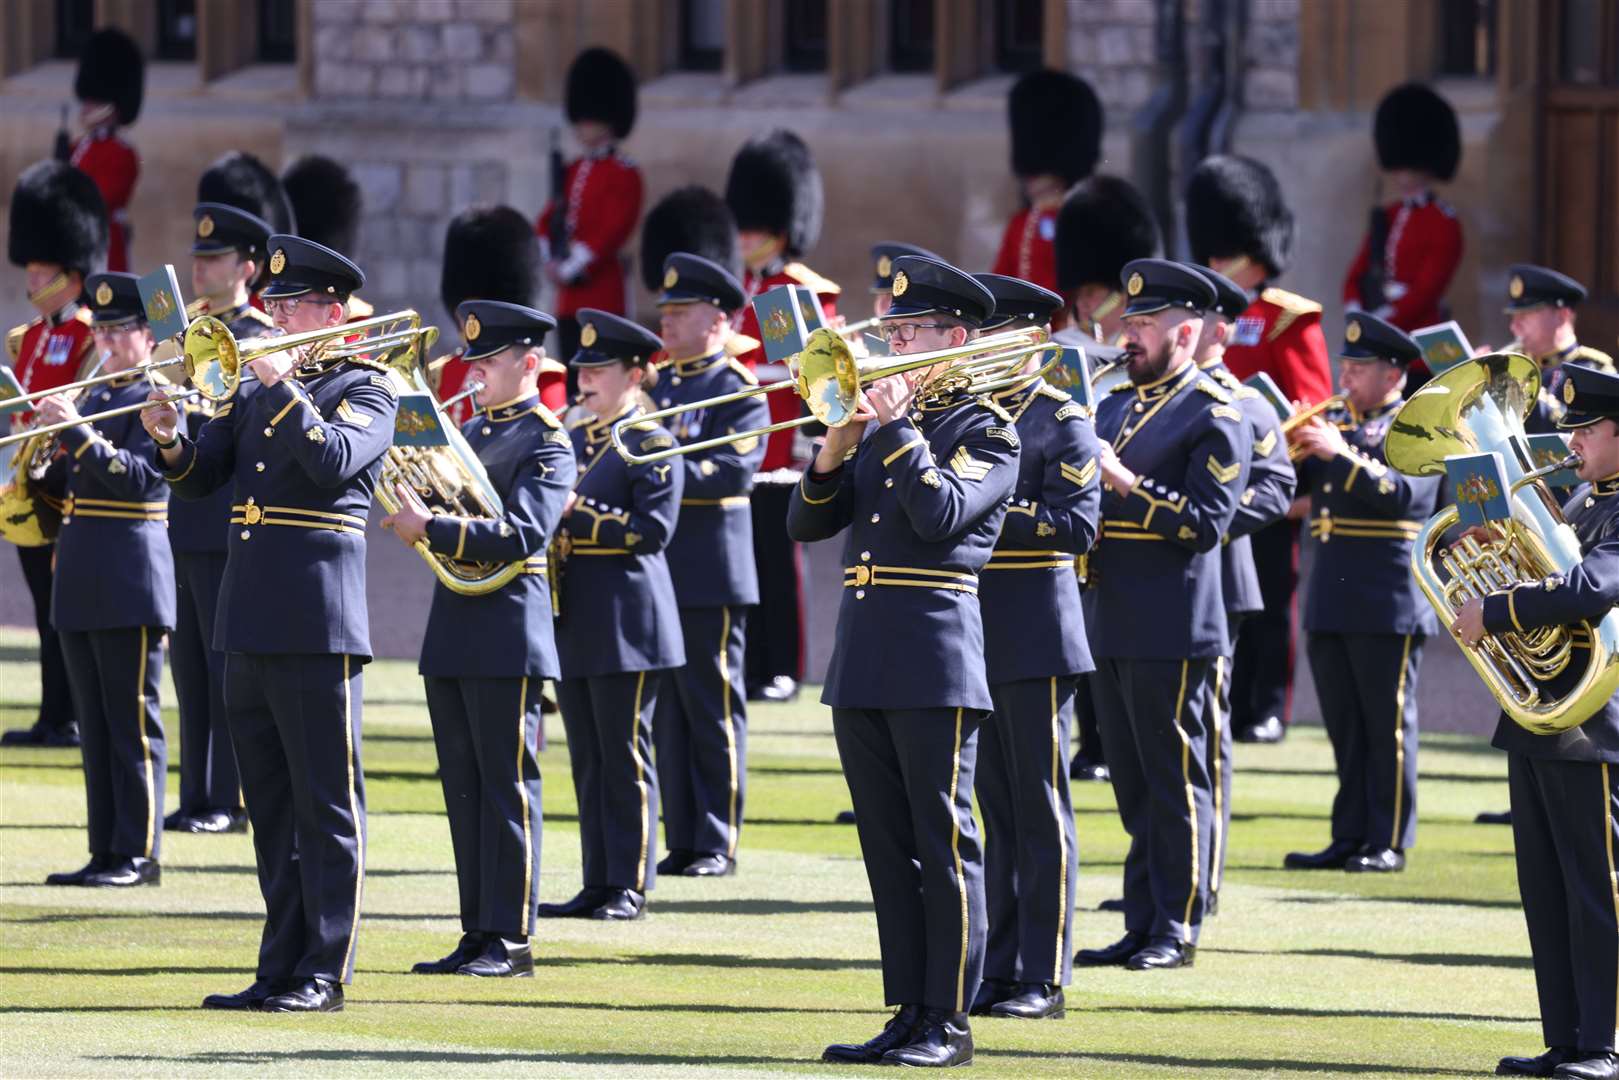 Members of an RAF military band playing in the Quadrangle (Ian Vogler/PA)